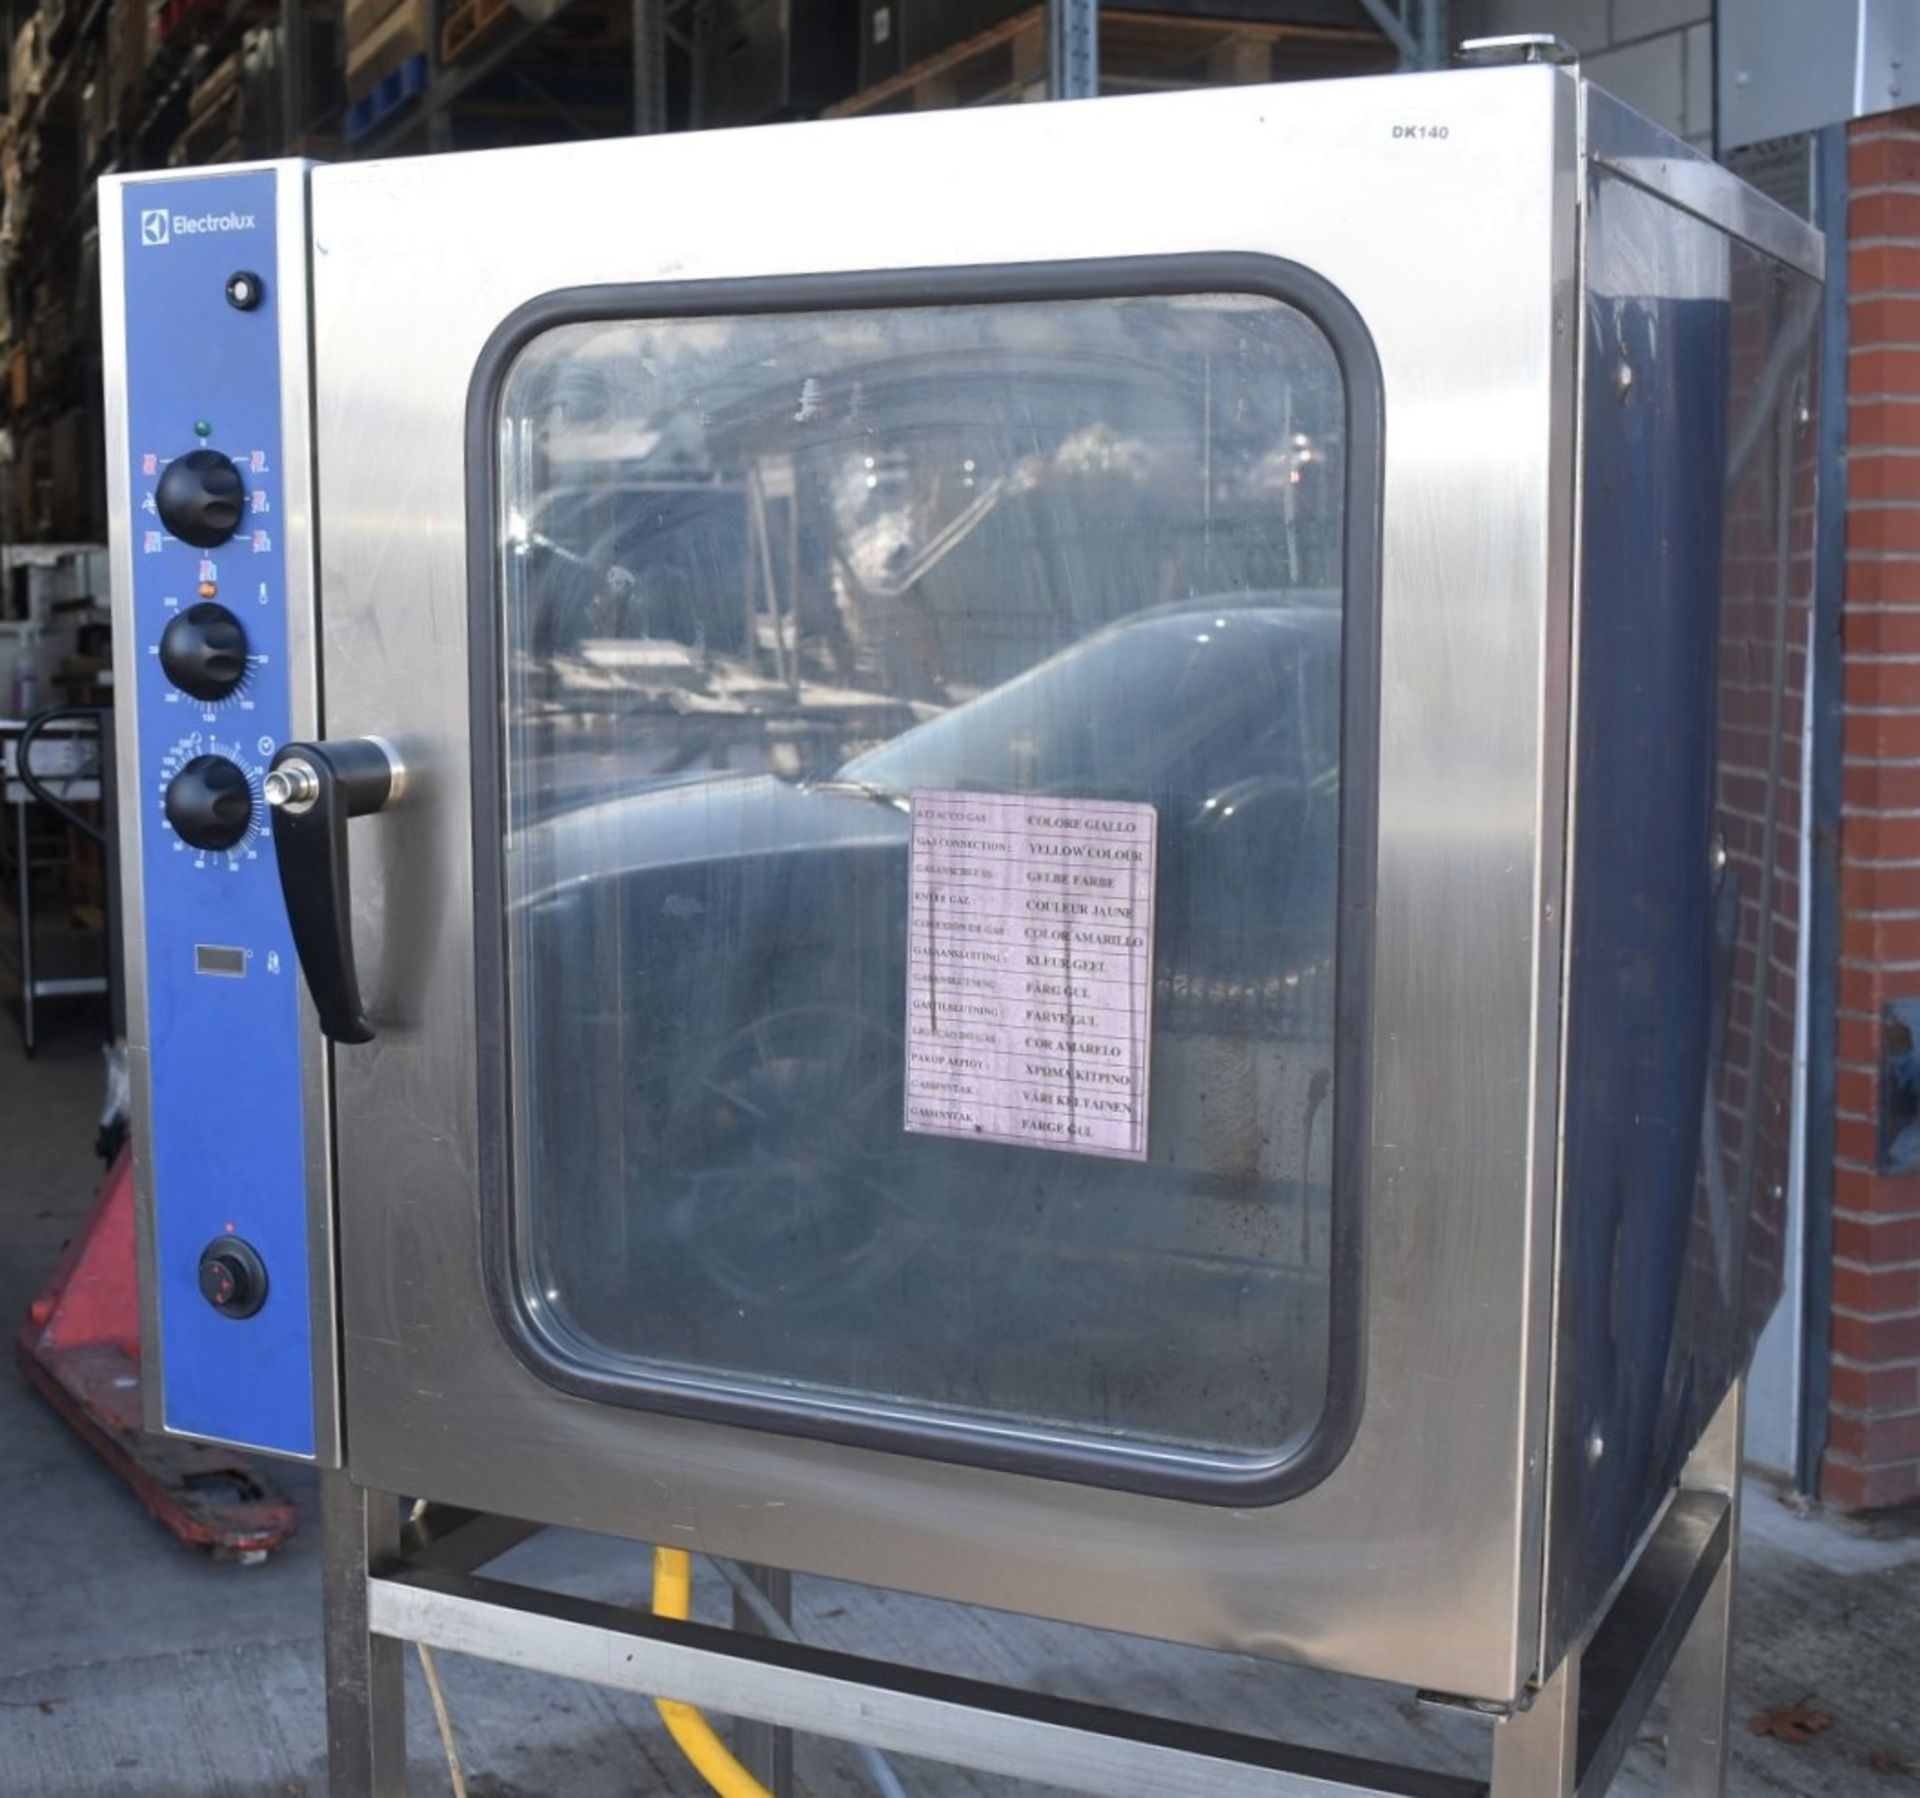 1 x Electrolux 10 Grid Convection Oven With Stand - 2020 Model - Type: ECFG101-0 - RRP £6,500 - Image 10 of 13